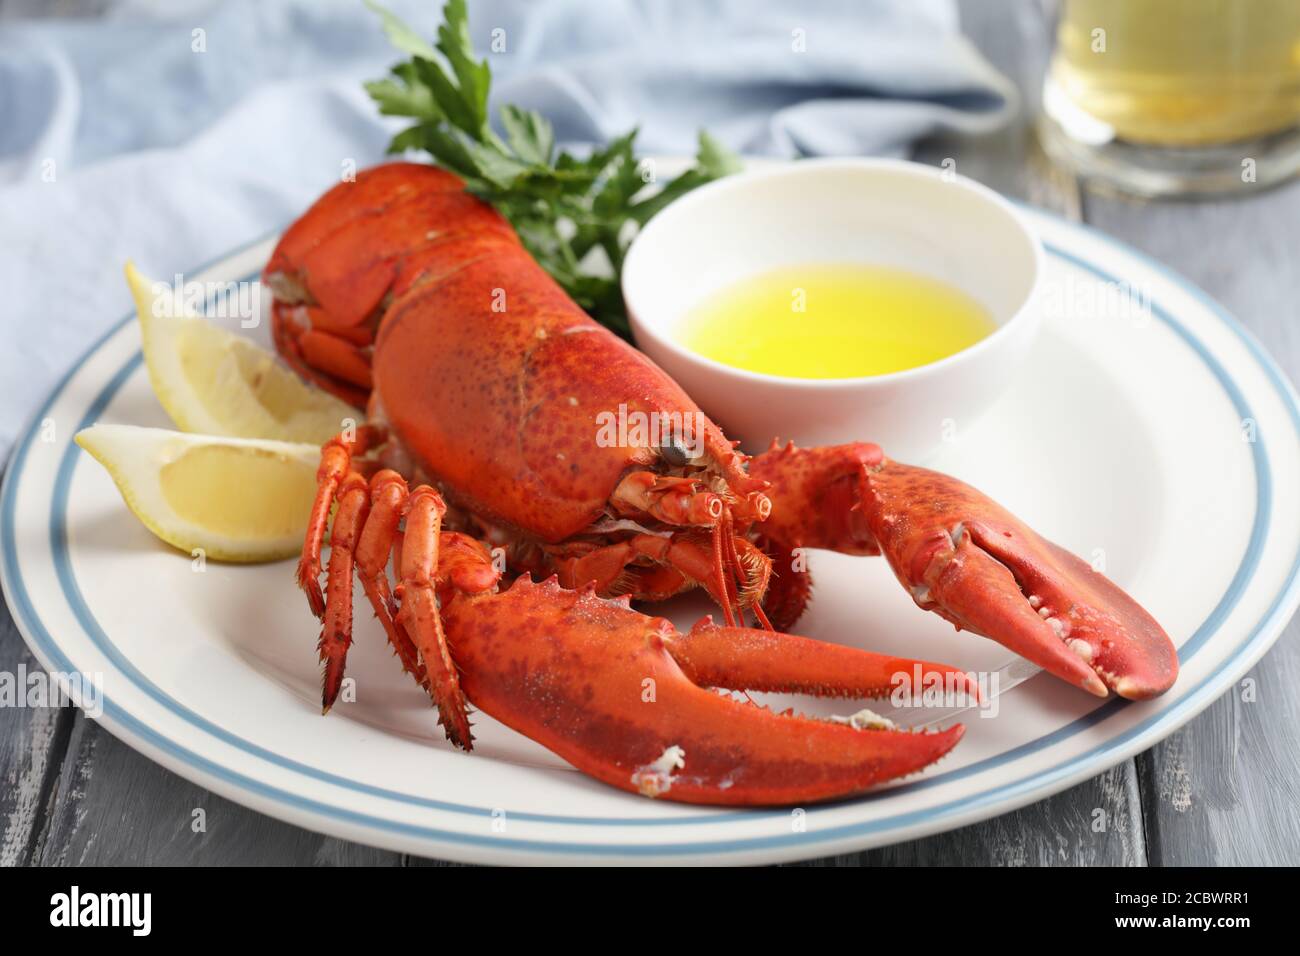 Lobster on plate with lemon and parsley Stock Photo